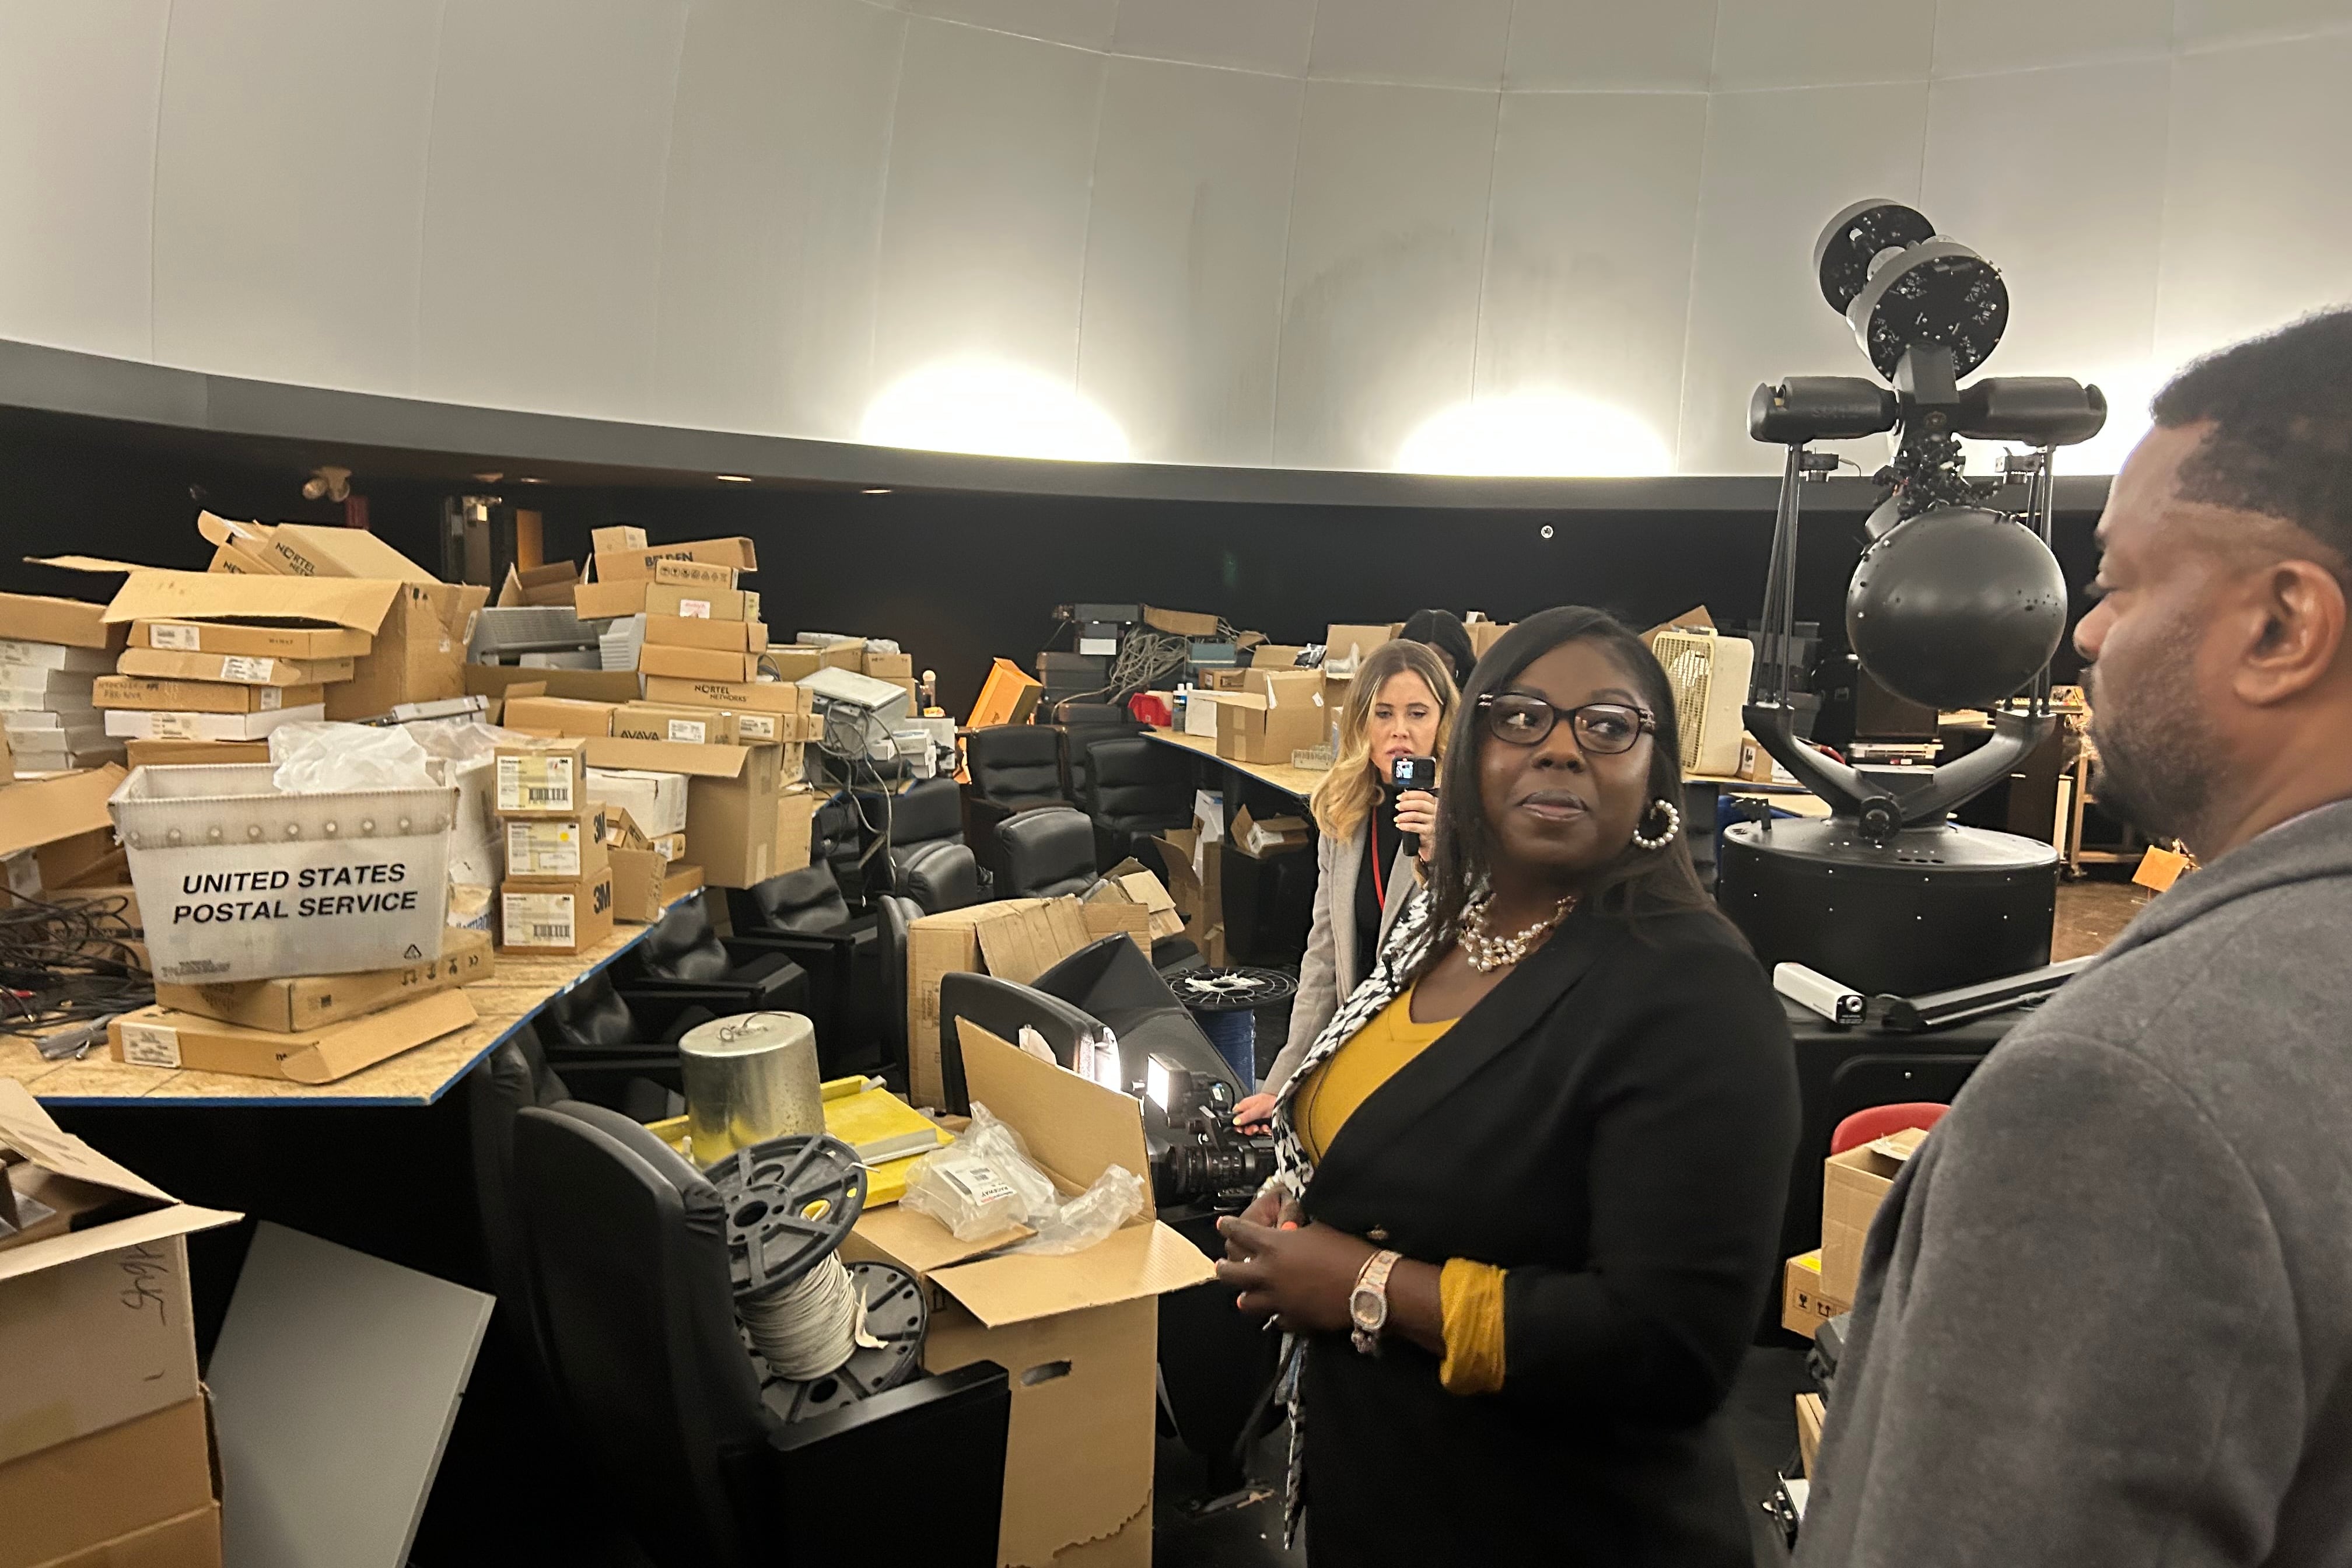 A woman wearing glasses, a yellow shirt, and black jacket stands in front of a juble of chairs, boxes, and other equipment.